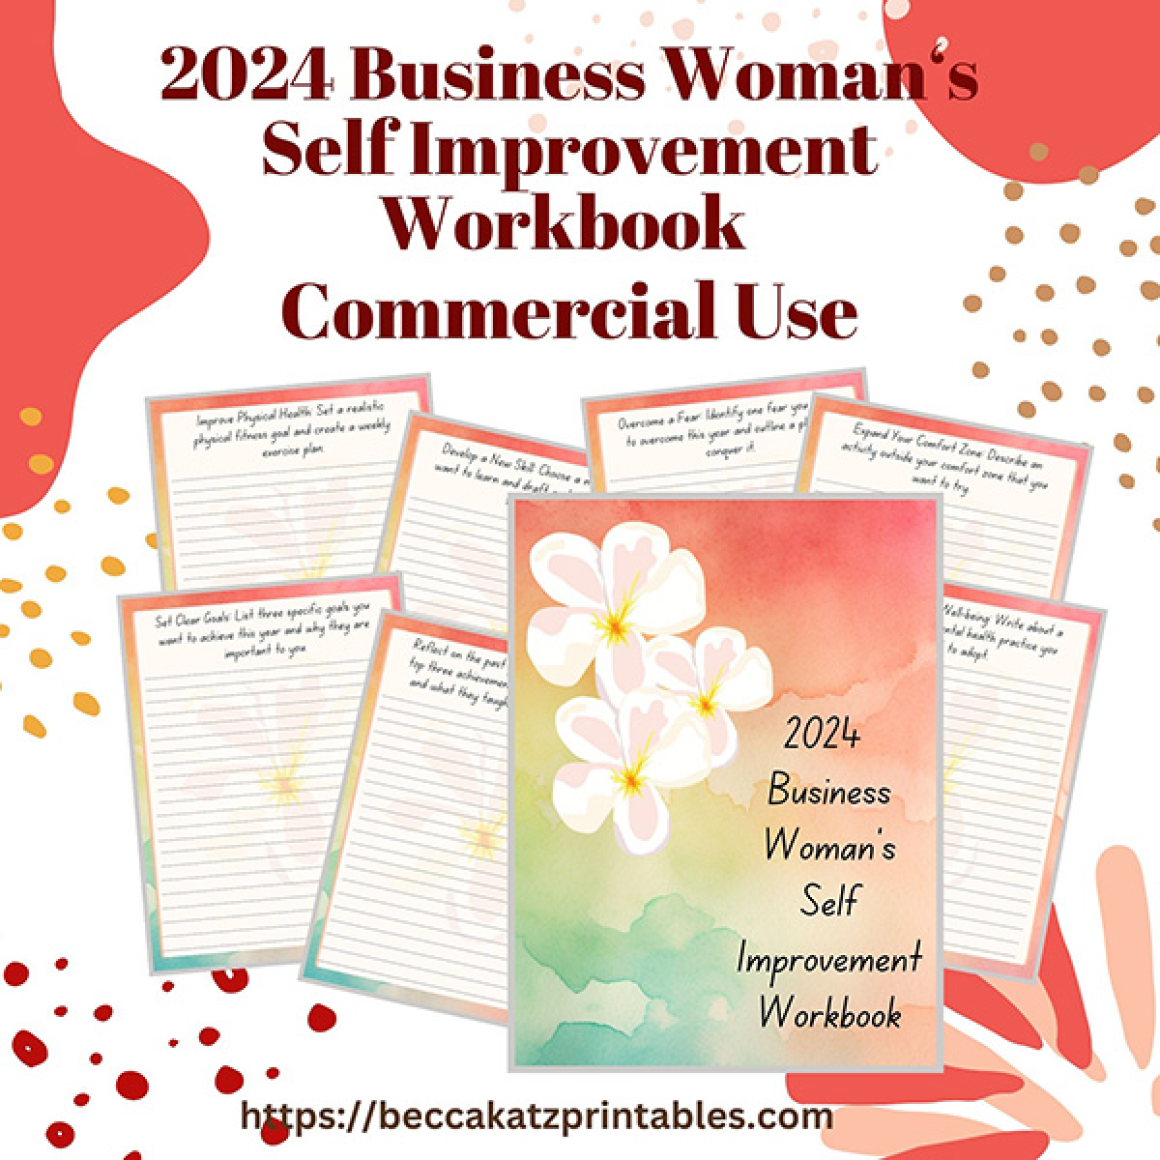 Journey to Your Best Self: 2024 Business Woman's Self Improvement Workbook